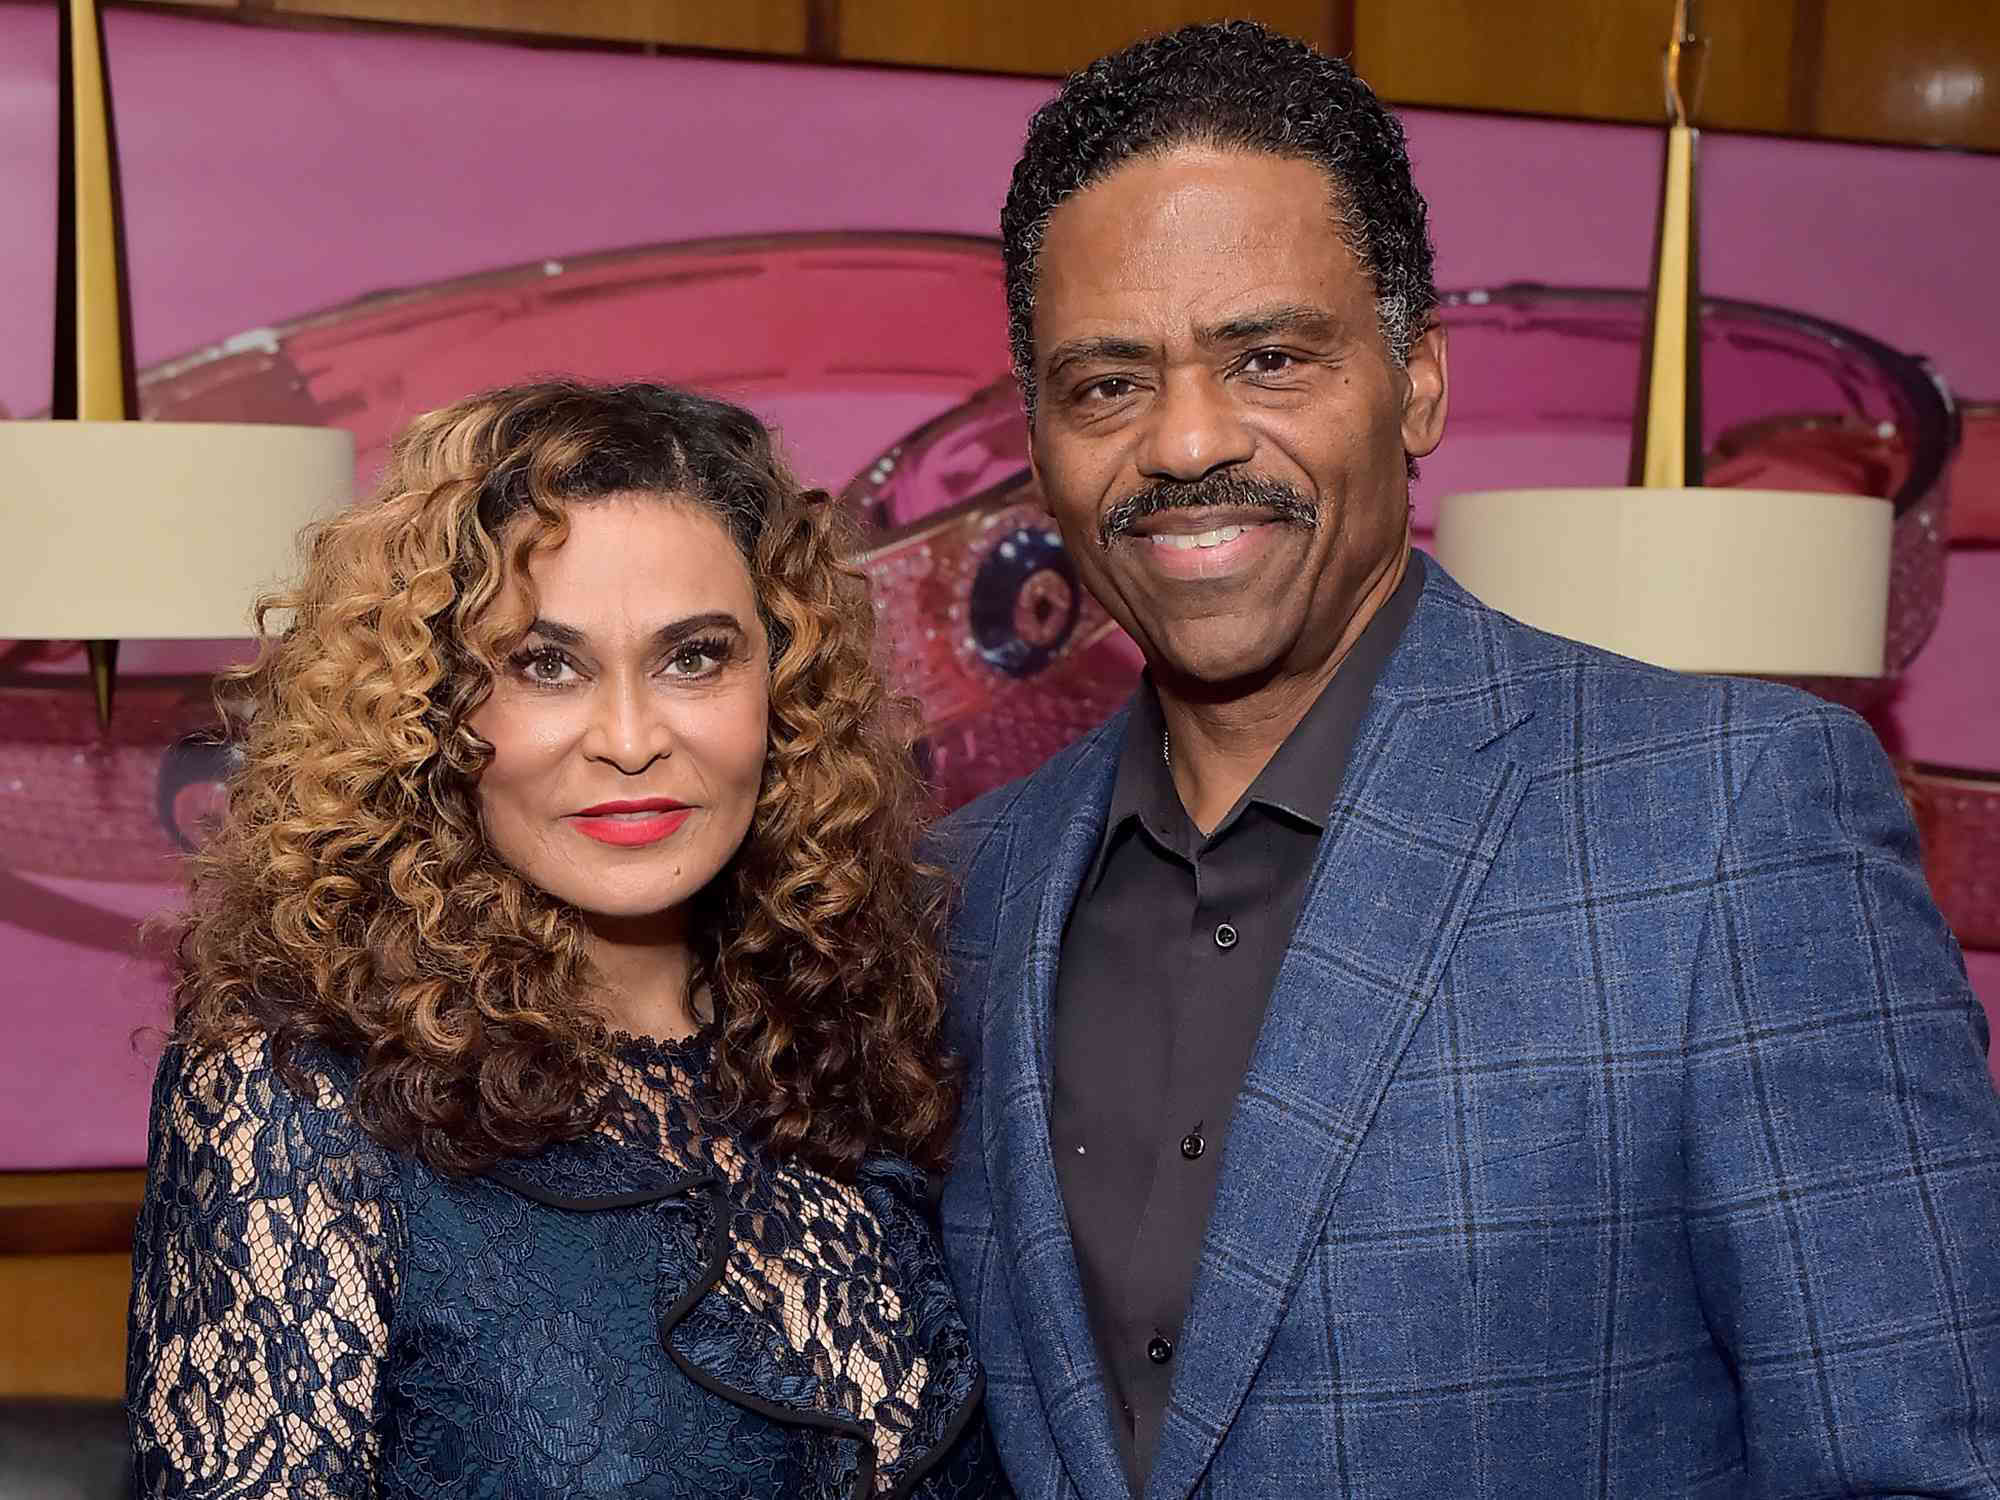 Who Is Tina Knowles-Lawson's Husband? All About Actor Richard Lawson